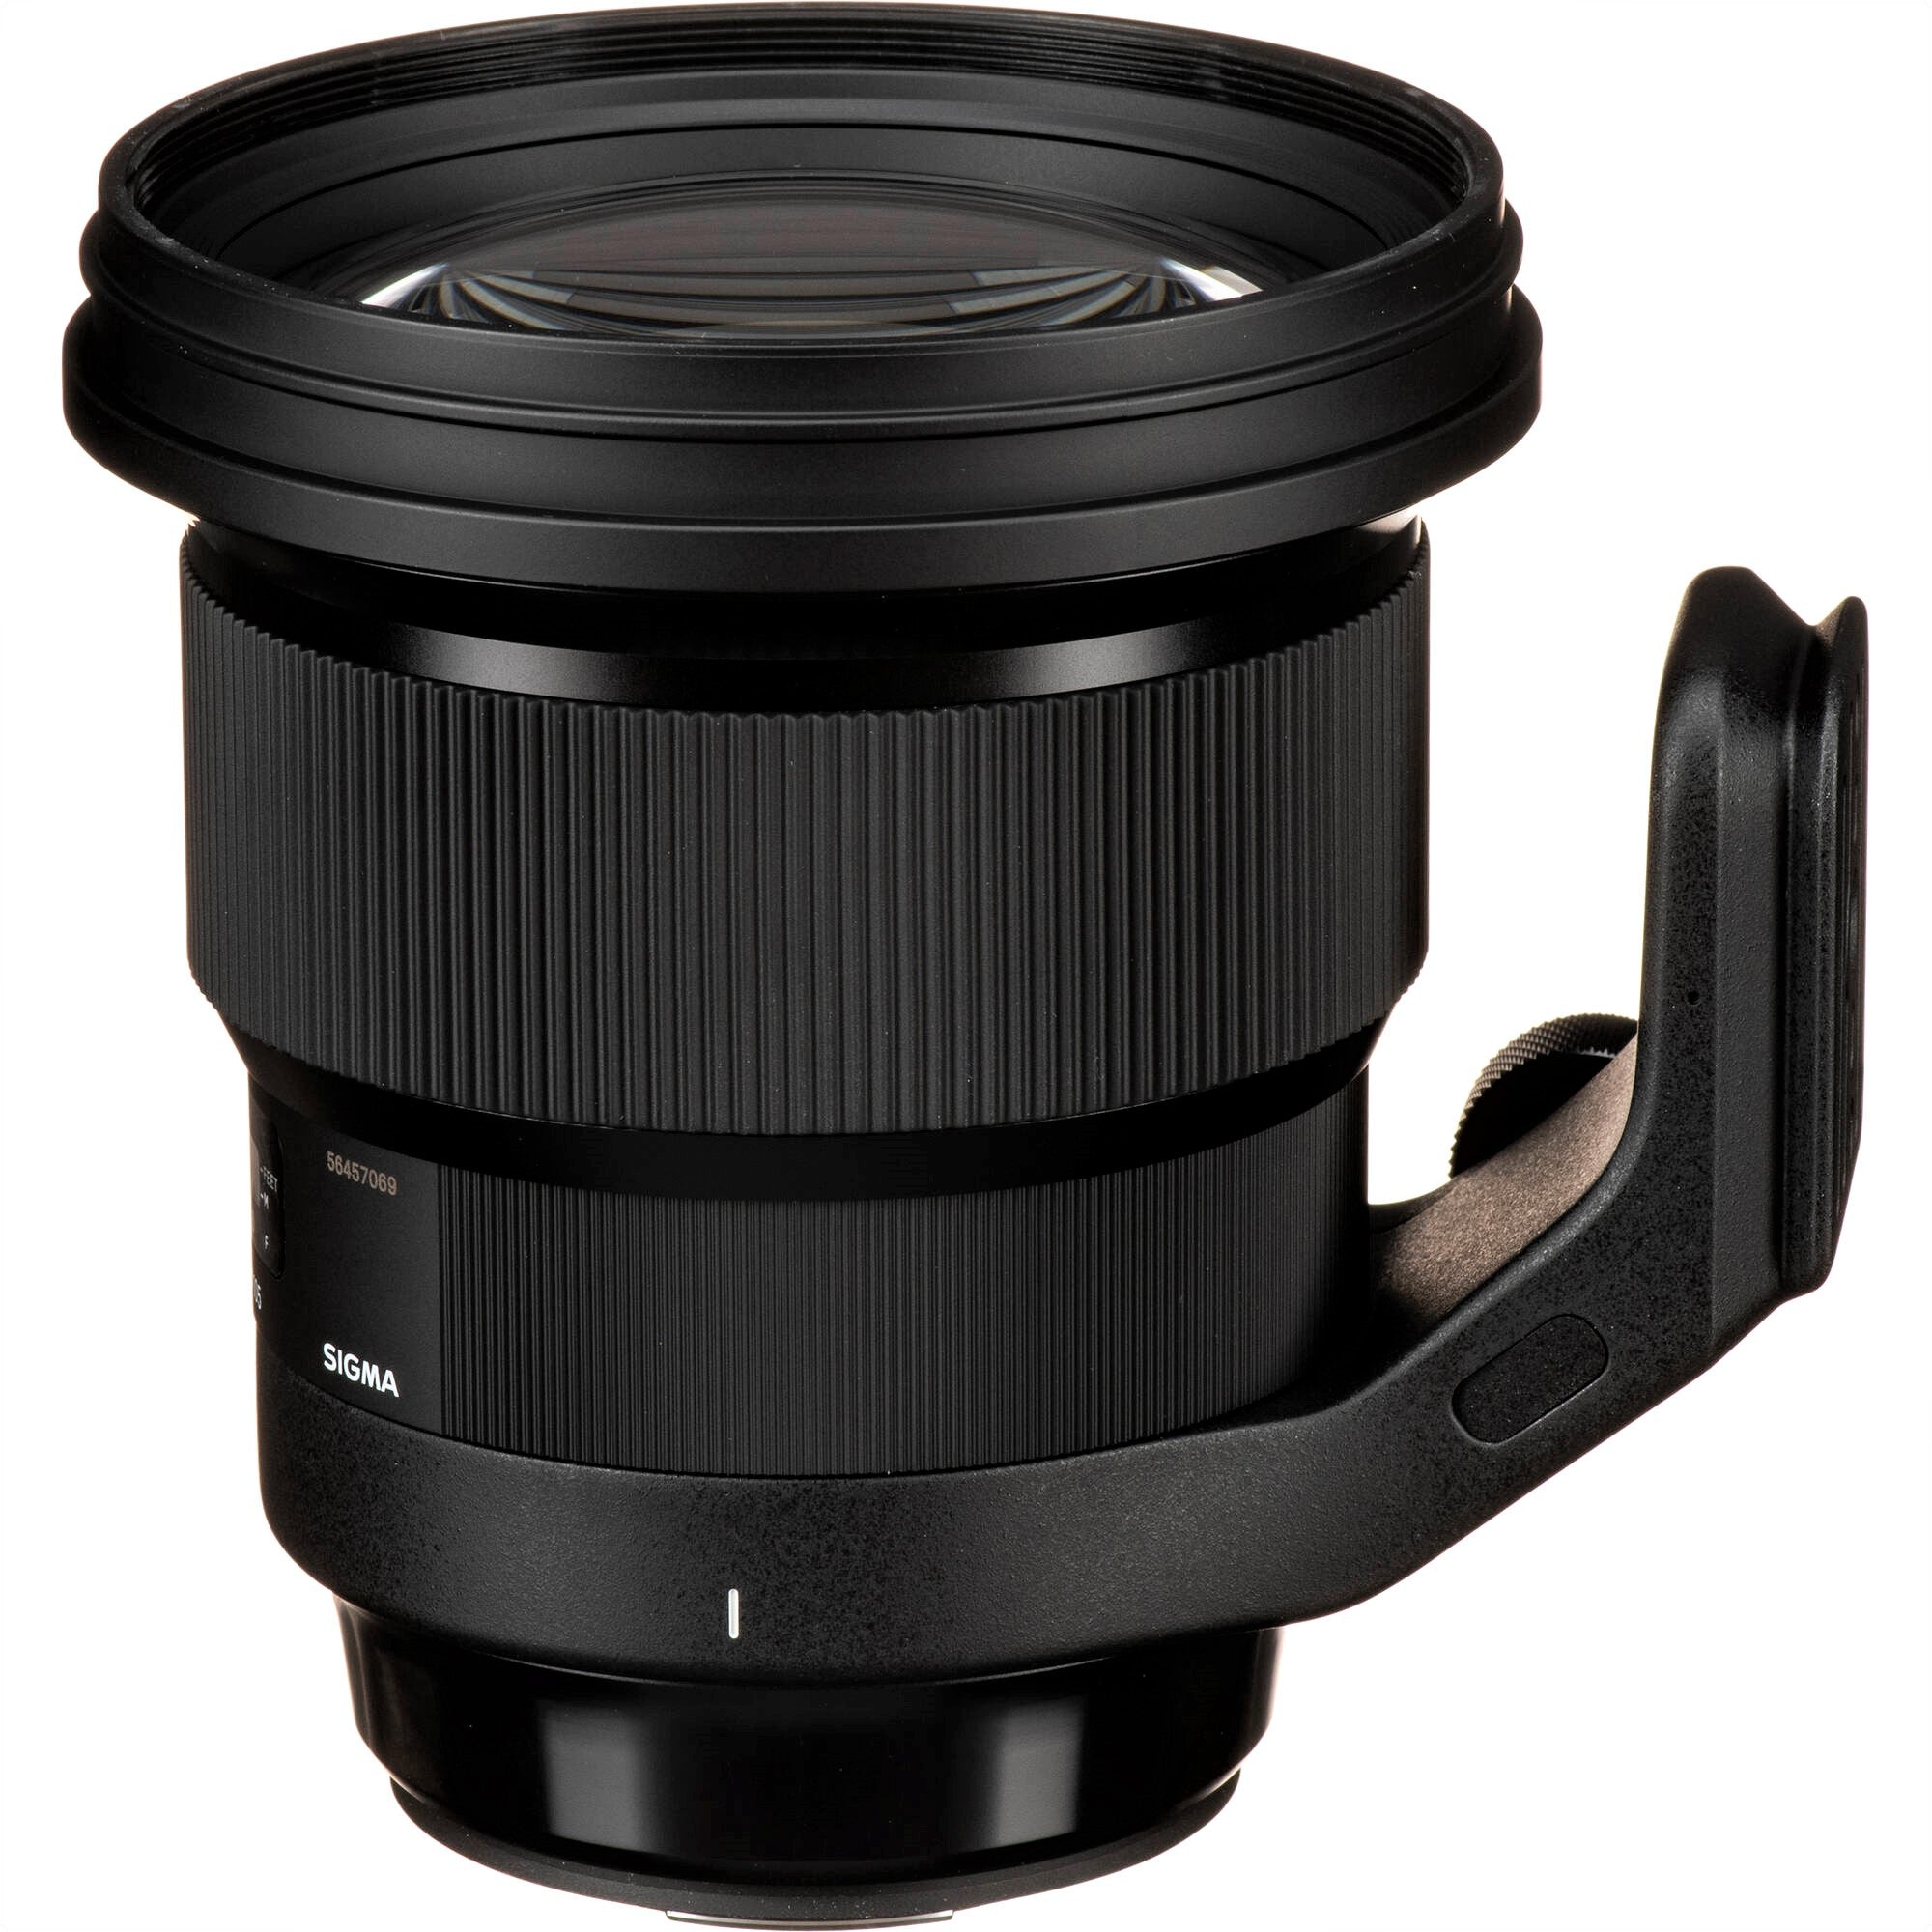 Sigma 105mm F1.4 DG HSM Art Lens for Canon EF with Attached Tripod Collar on the Right Side